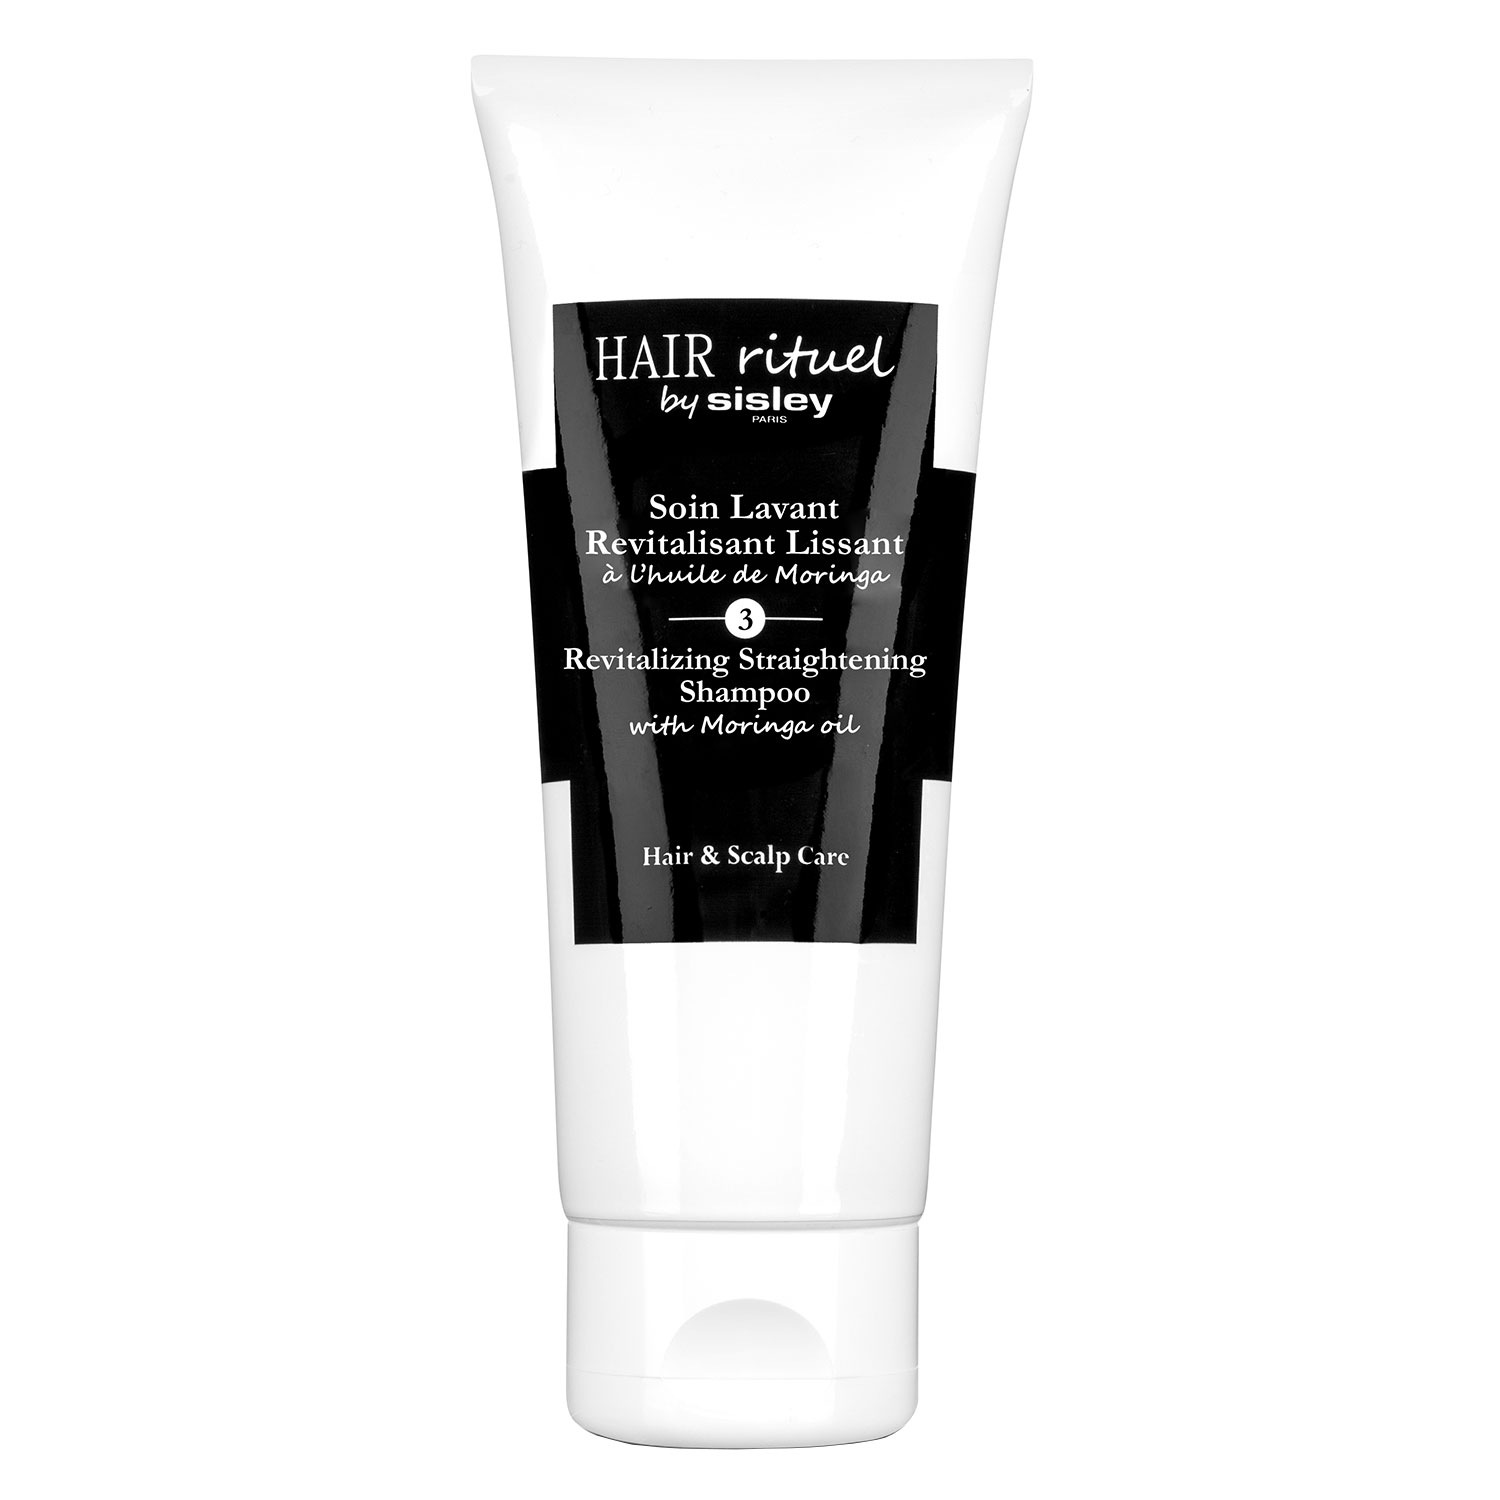 Product image from Hair Rituel by Sisley - Soin Lavant Revitalisant Lissant